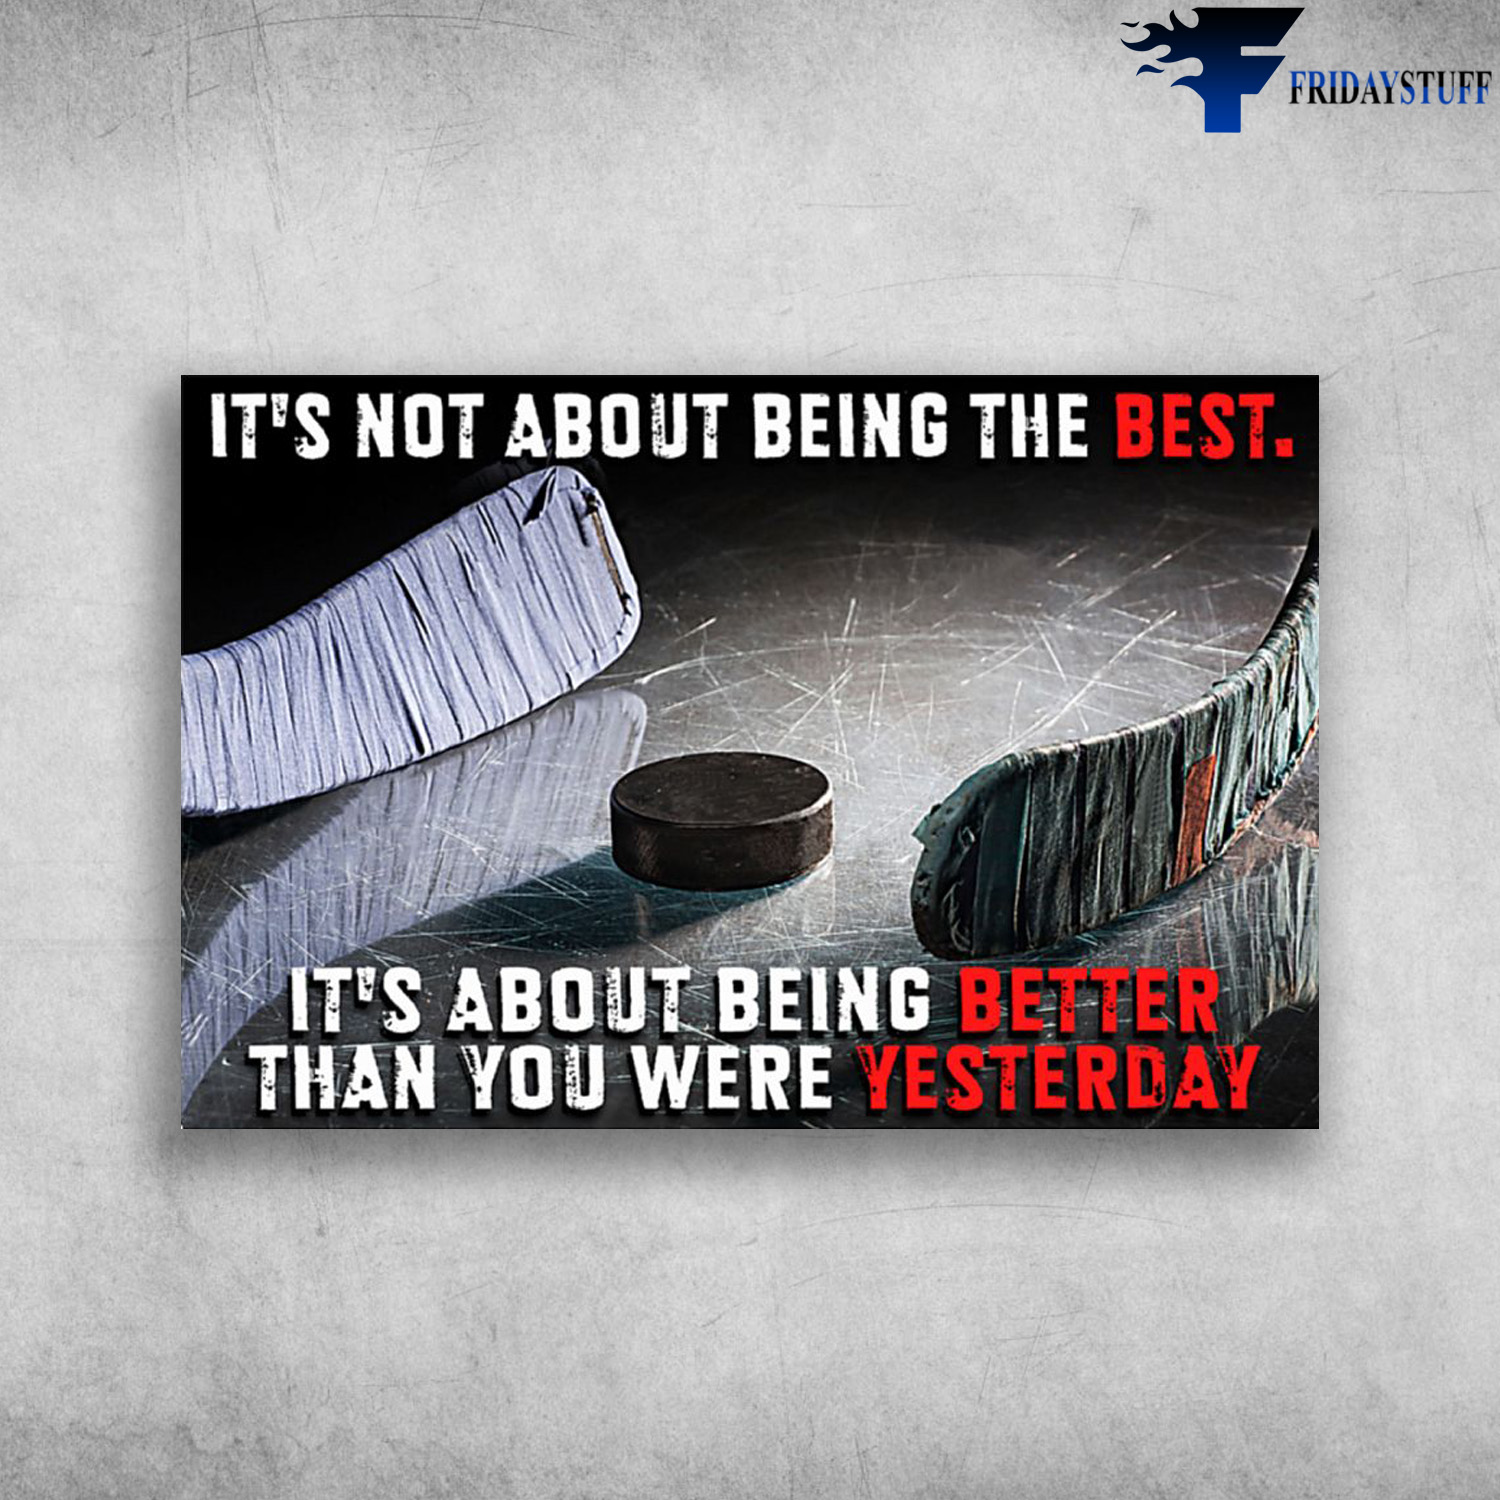 The Hockey Tool - It's Not About Being The Best, It's About Being Better Than You Were Yesterday